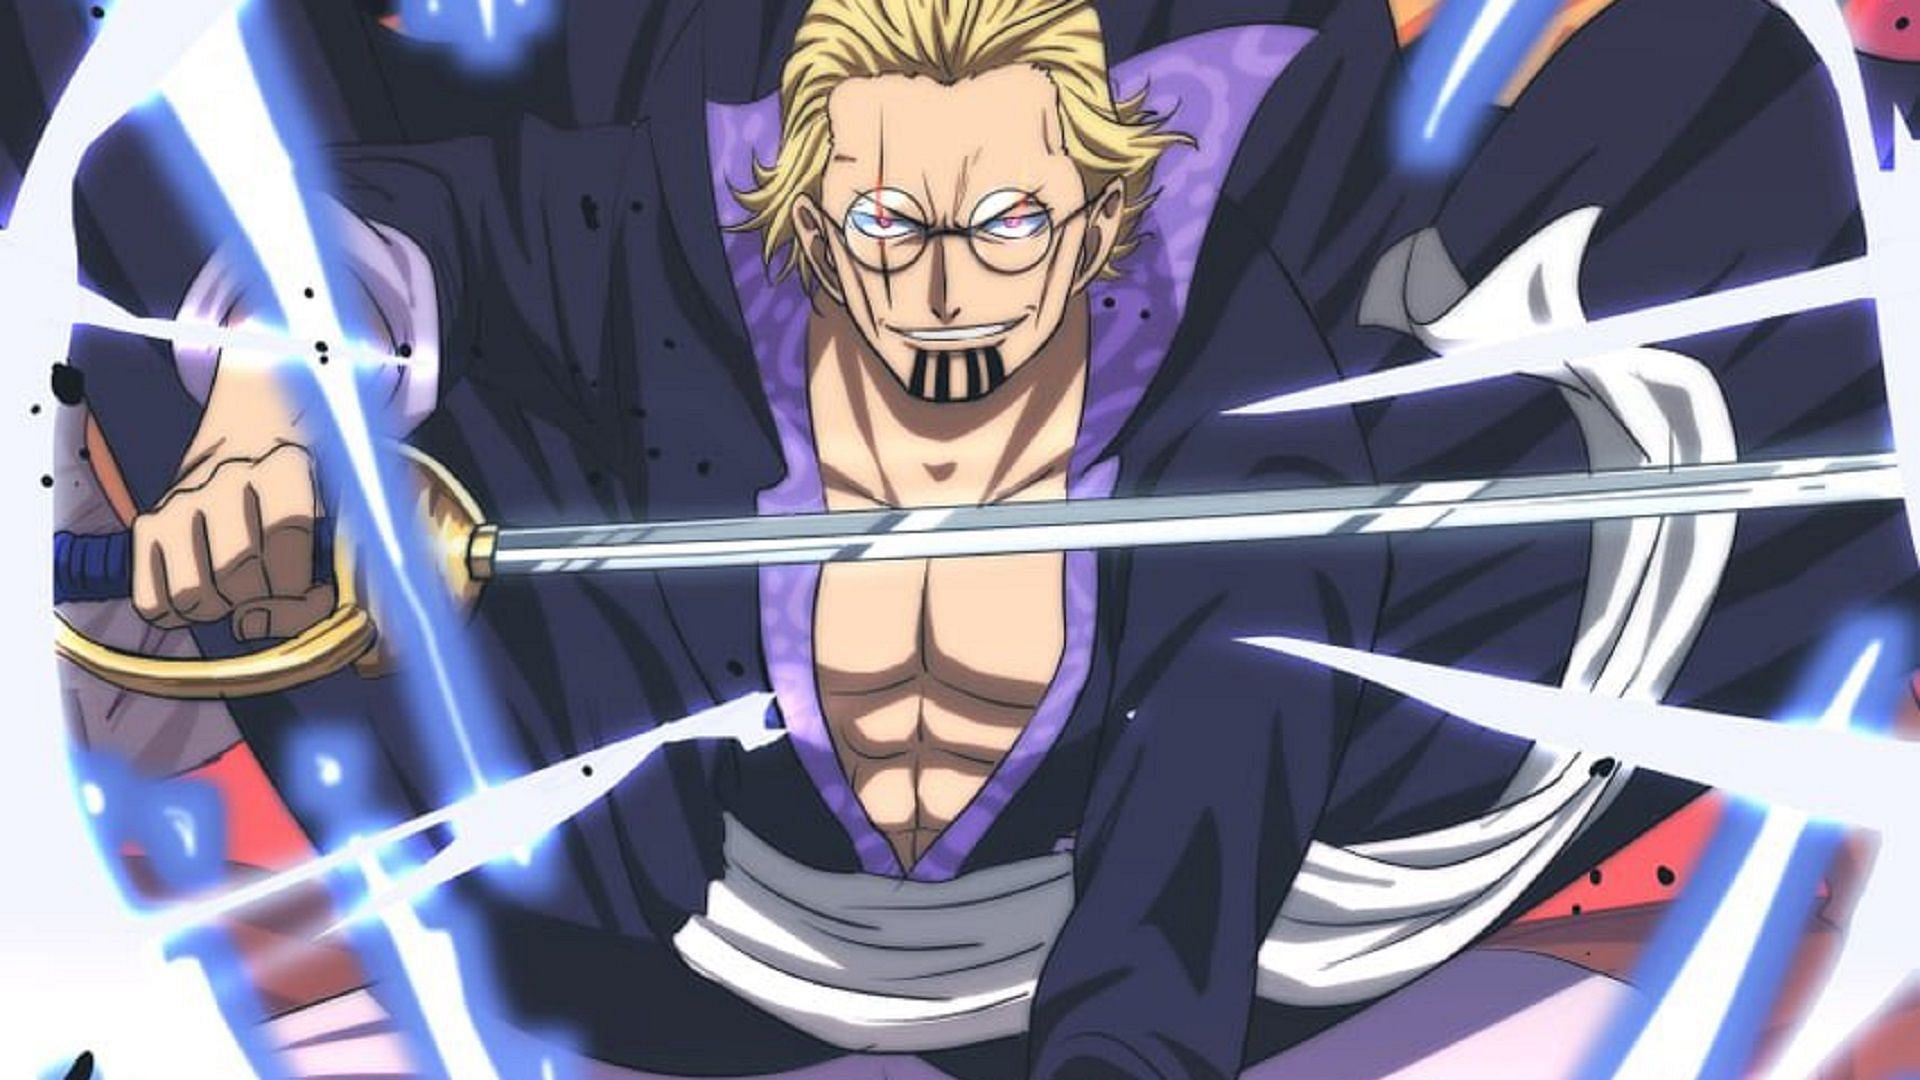 Rayleigh reached the top of the One Piece world relying on his sword and his Haki (Image via Eiichiro Oda/Shueisha, One Piece)